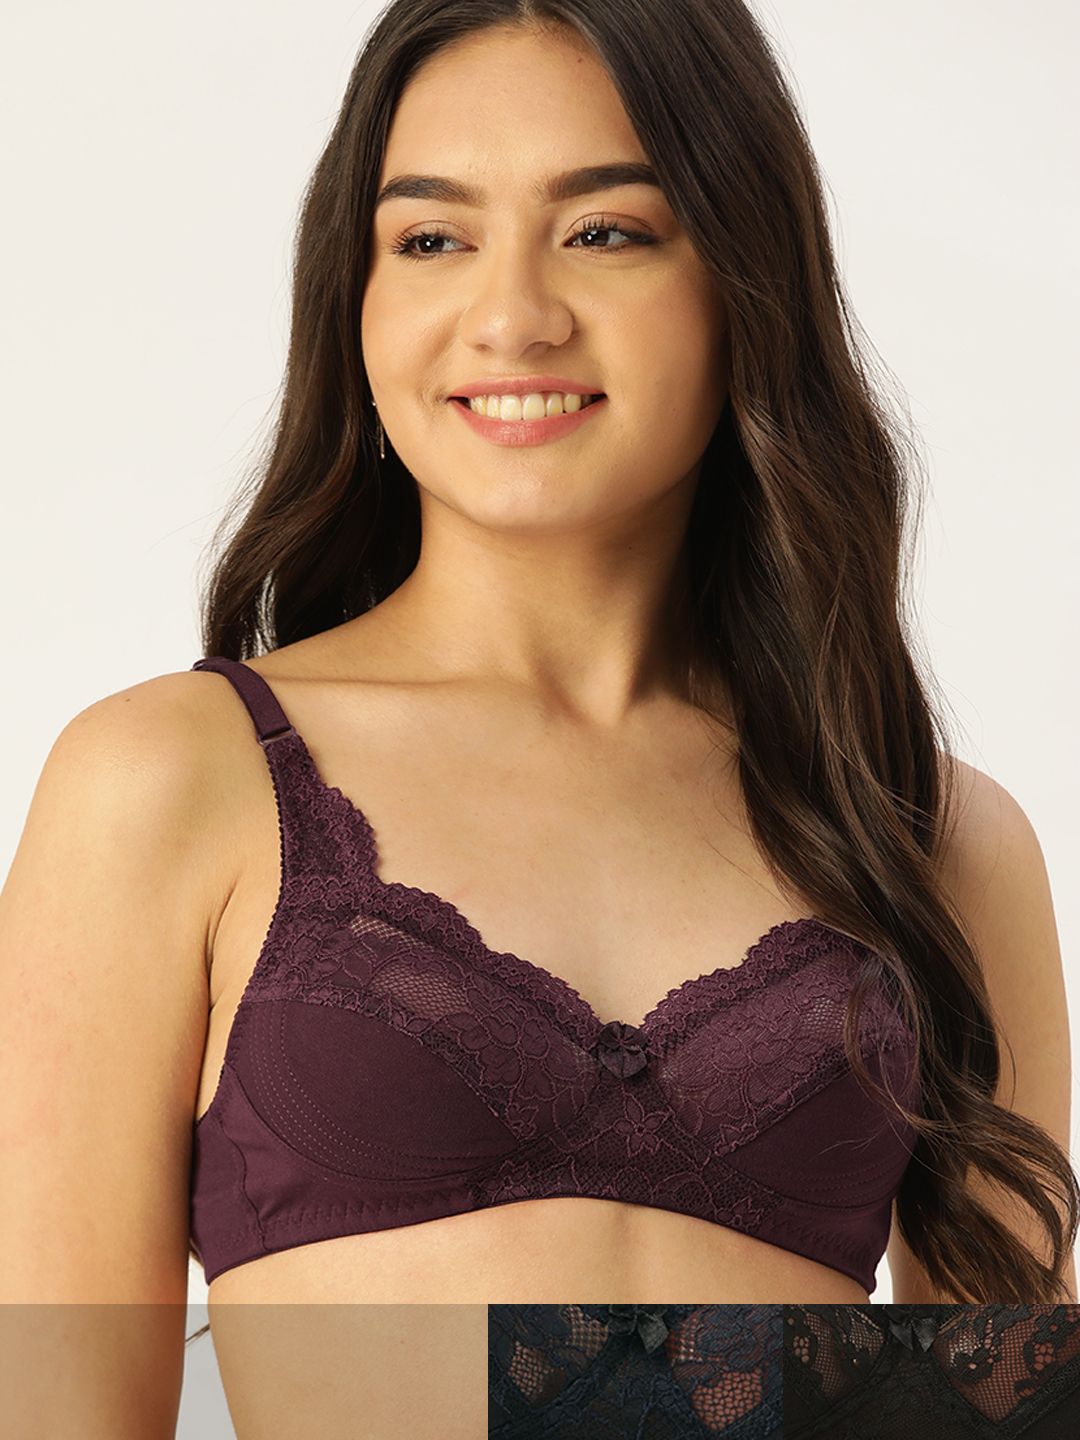 SAVE ₹1840 on DressBerry Pack Of 3 Everyday Bra